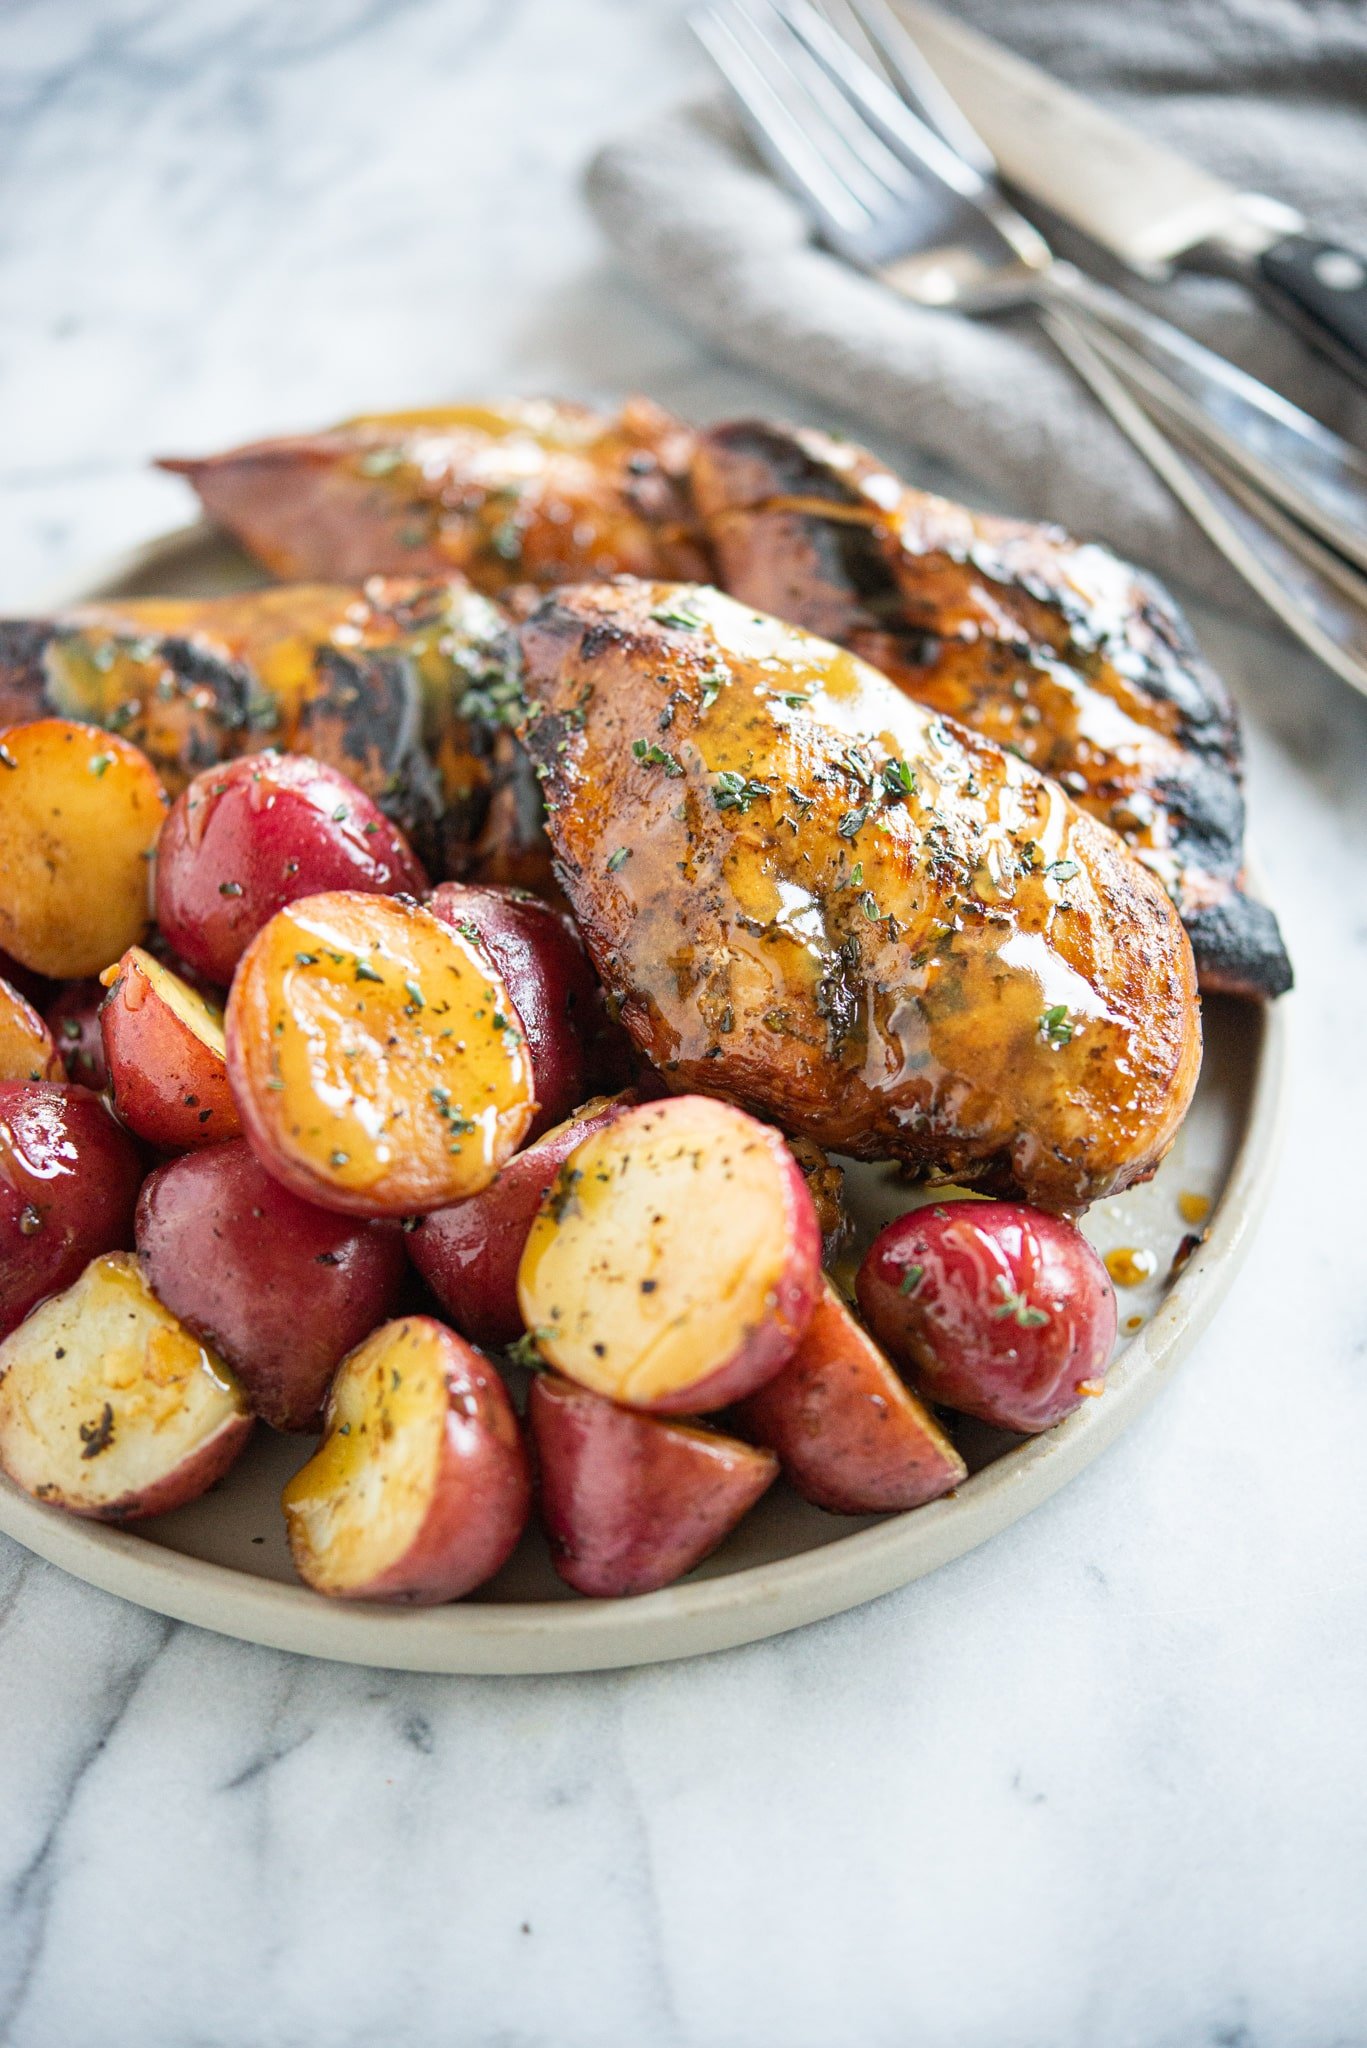 Seared honey mustard chicken and halved red potatoes on a grey plate on a marble surface